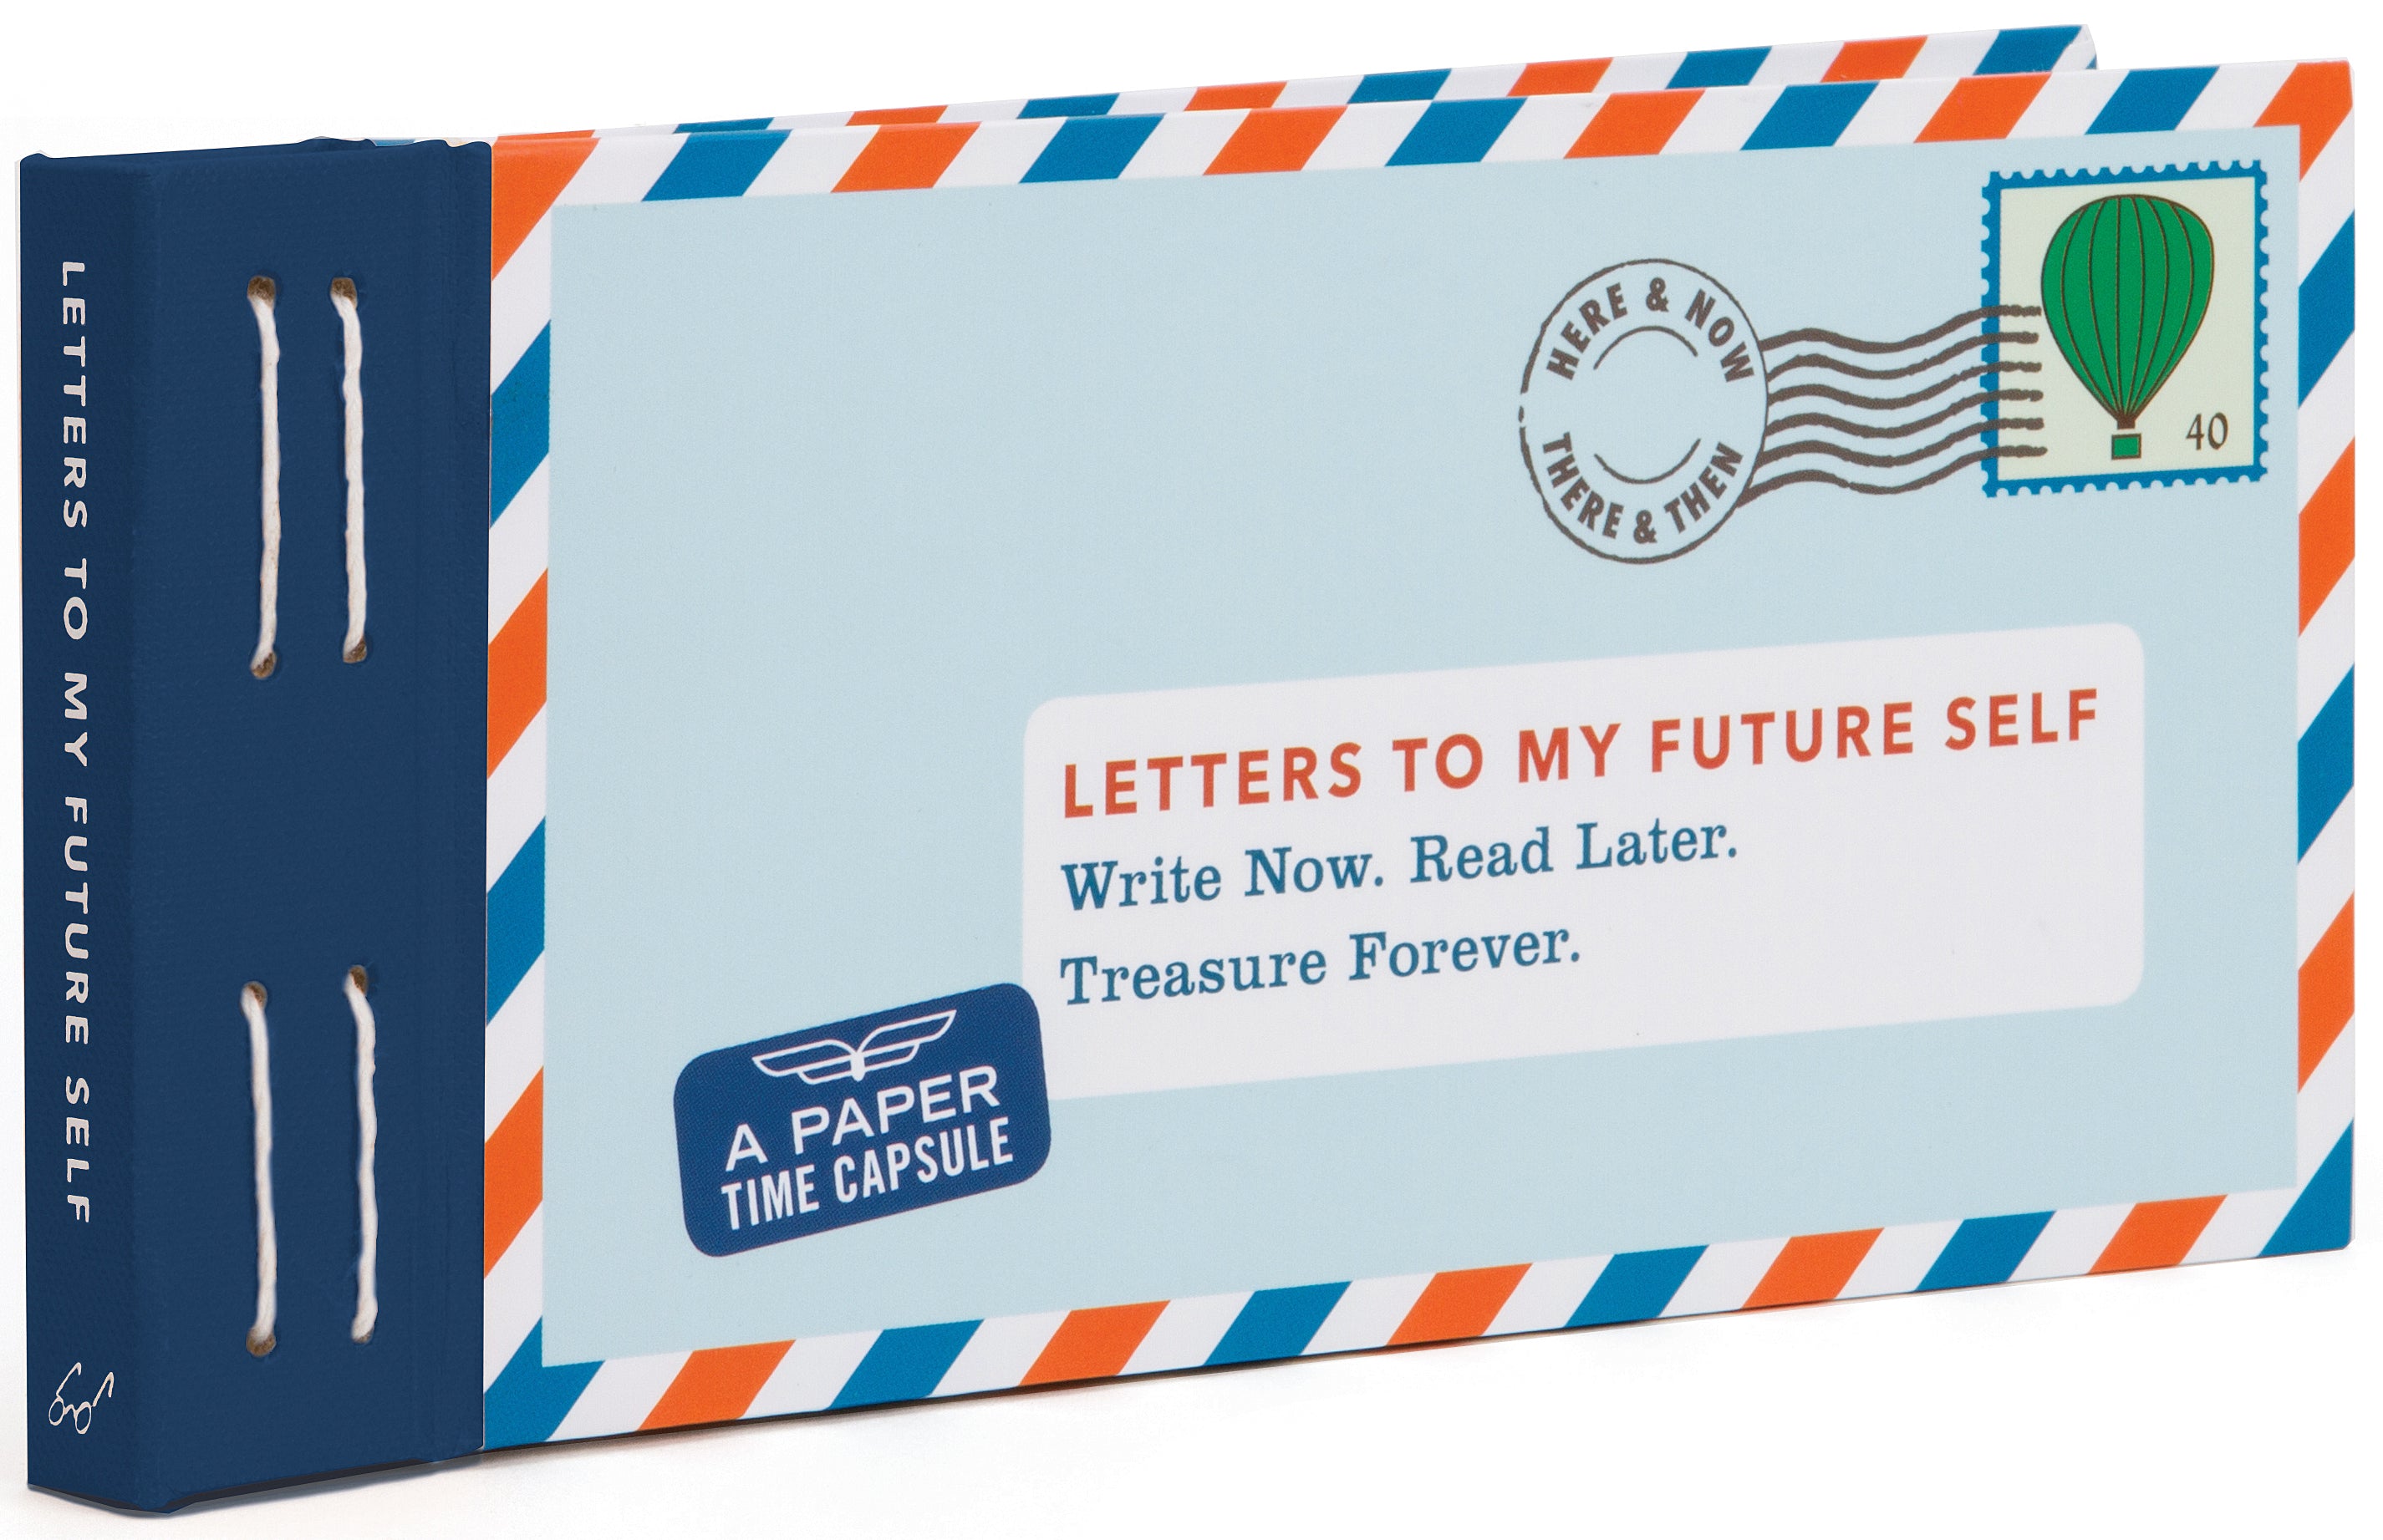 This letter write now. A Letter to my Future self. Letter to your Future self. Letter for Future me. Letter to Future me.